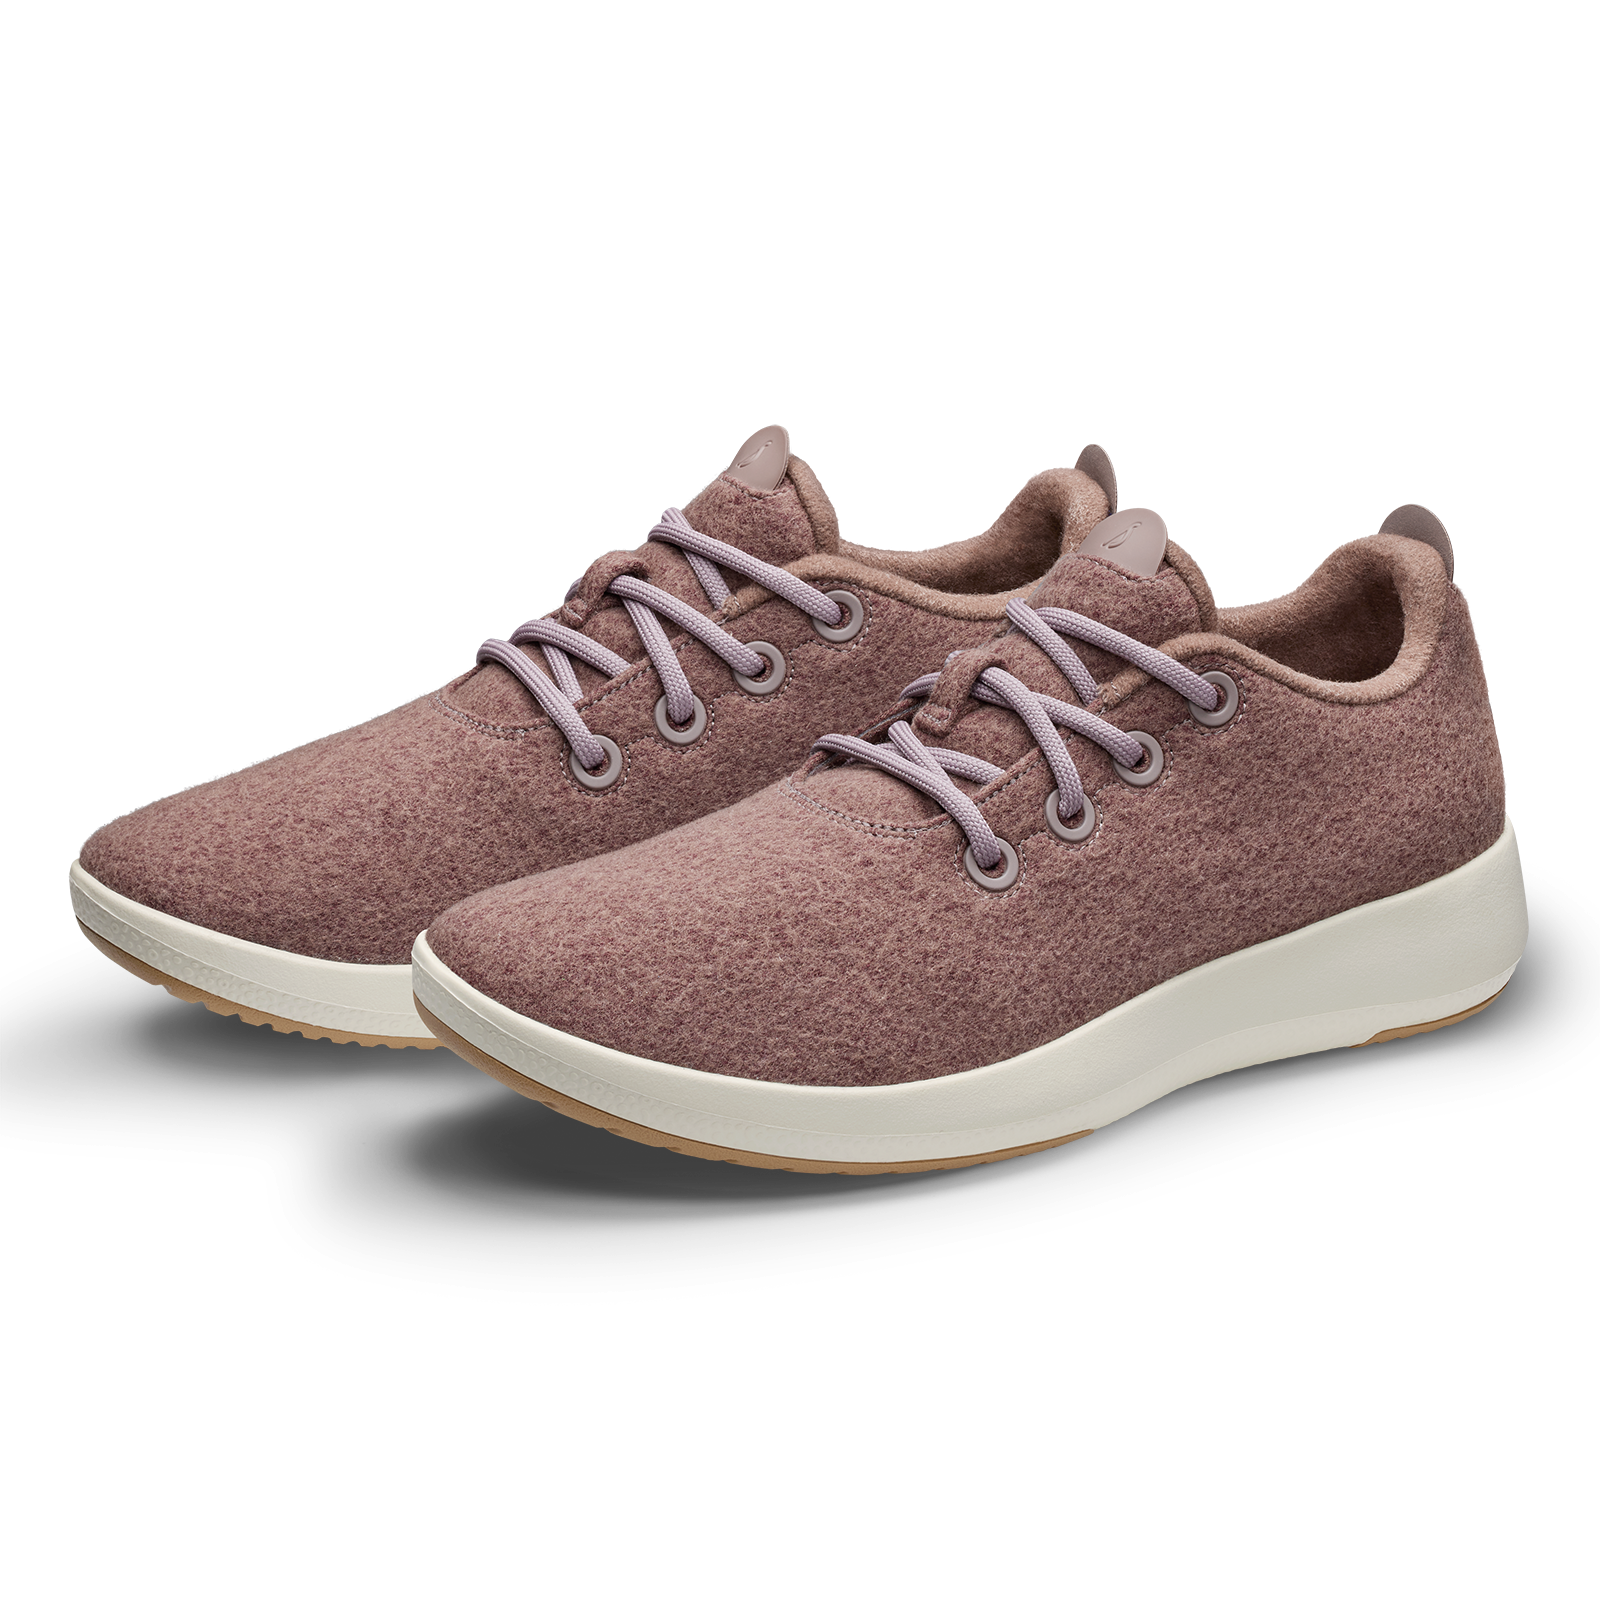 Men's Wool Runner Mizzles - Stormy Mauve (Natural White Sole)